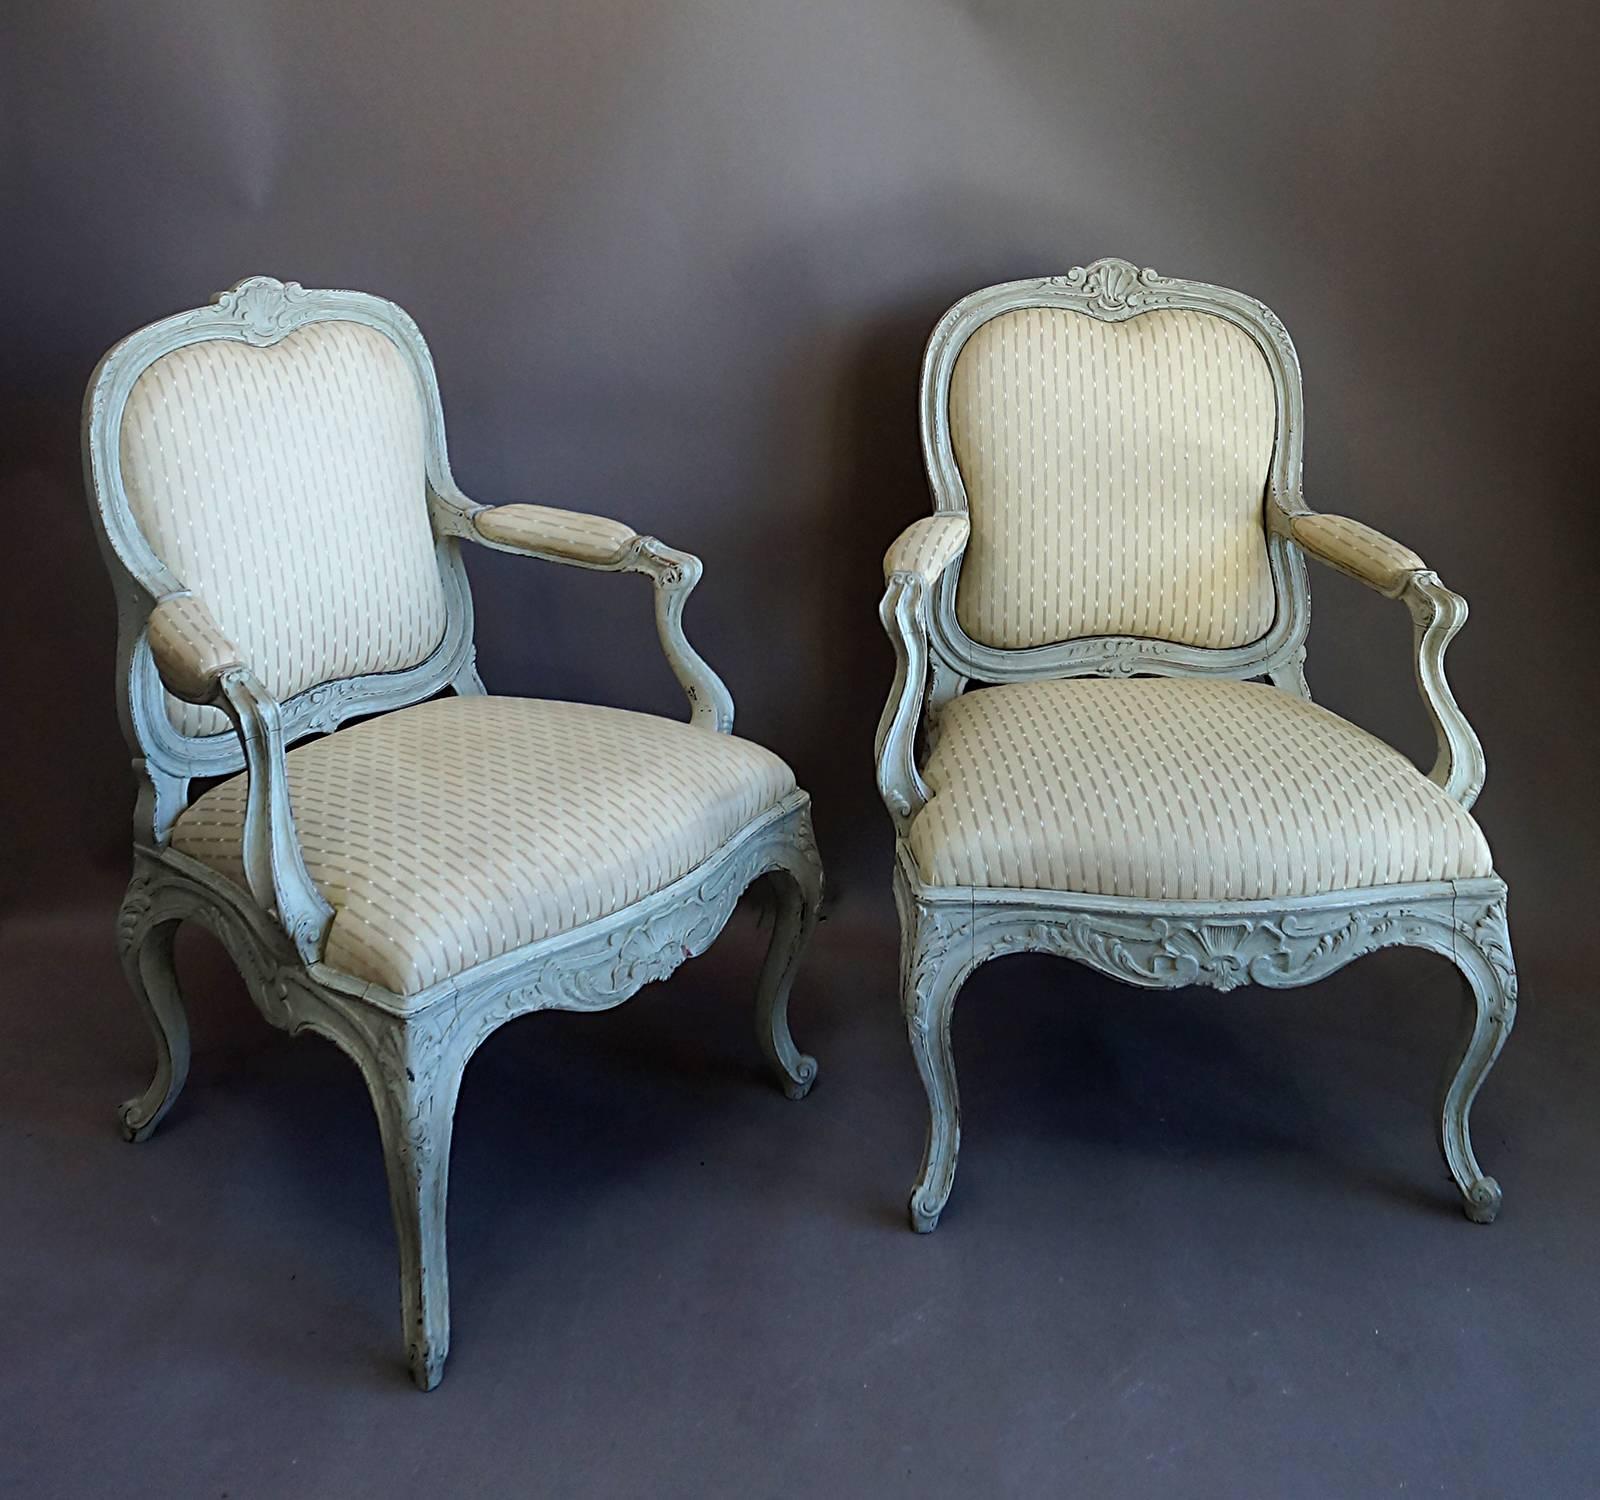 Pair of Swedish armchairs, circa 1880, with frames carved in the Rococo style. The curved crest has a central shell motif with foliate detail on either side. The same elements decorate the lower portion of the frame and the legs. Scrolled feet,